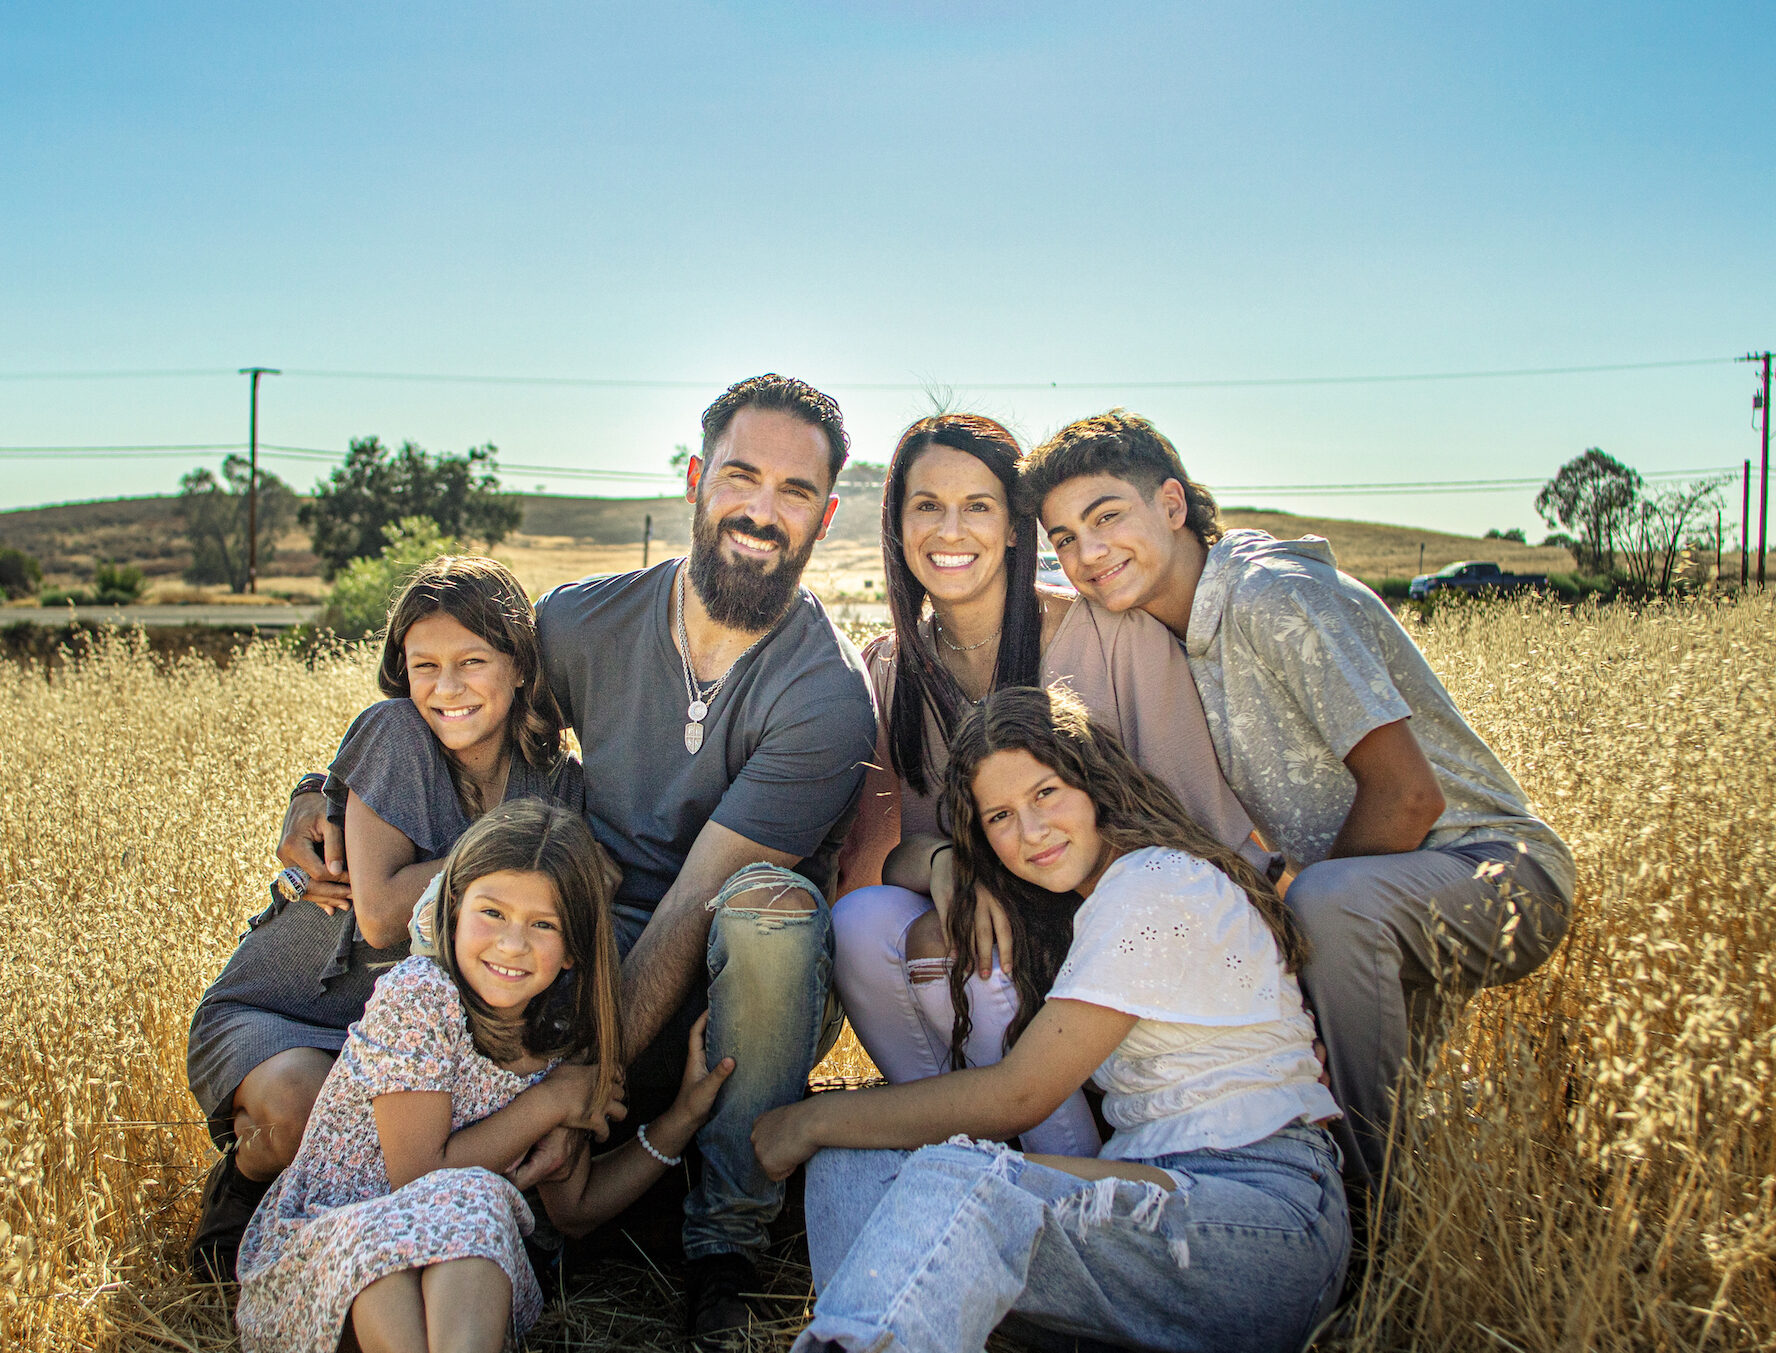 Super Bowl champ Eric Weddle honored by Poway City Council - The